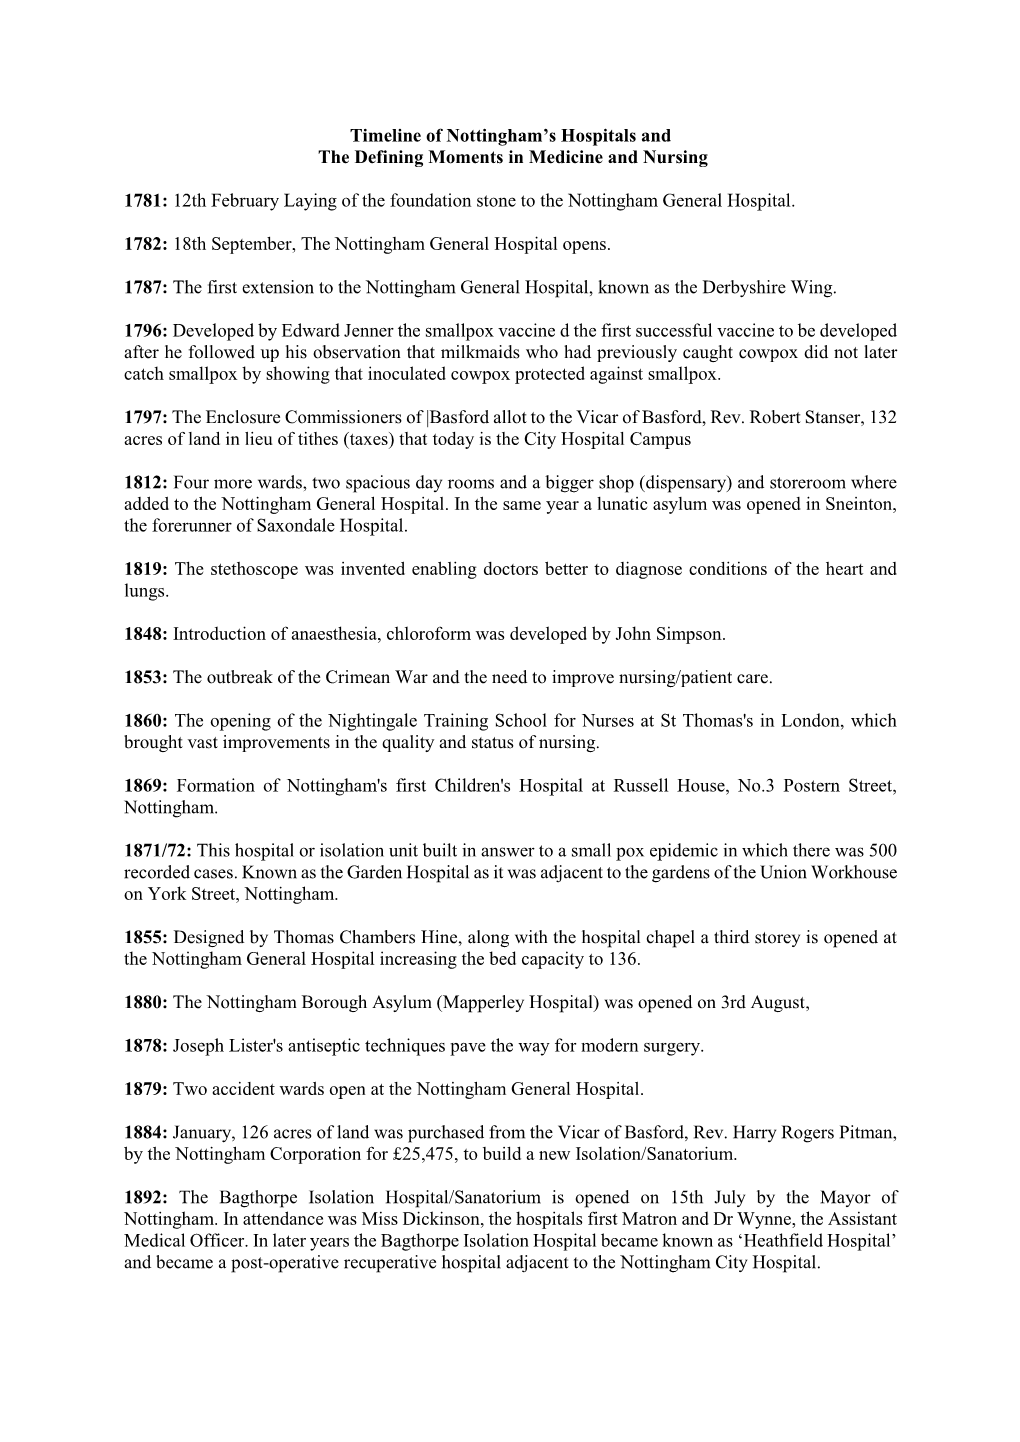 Timeline of Nottingham's Hospitals And